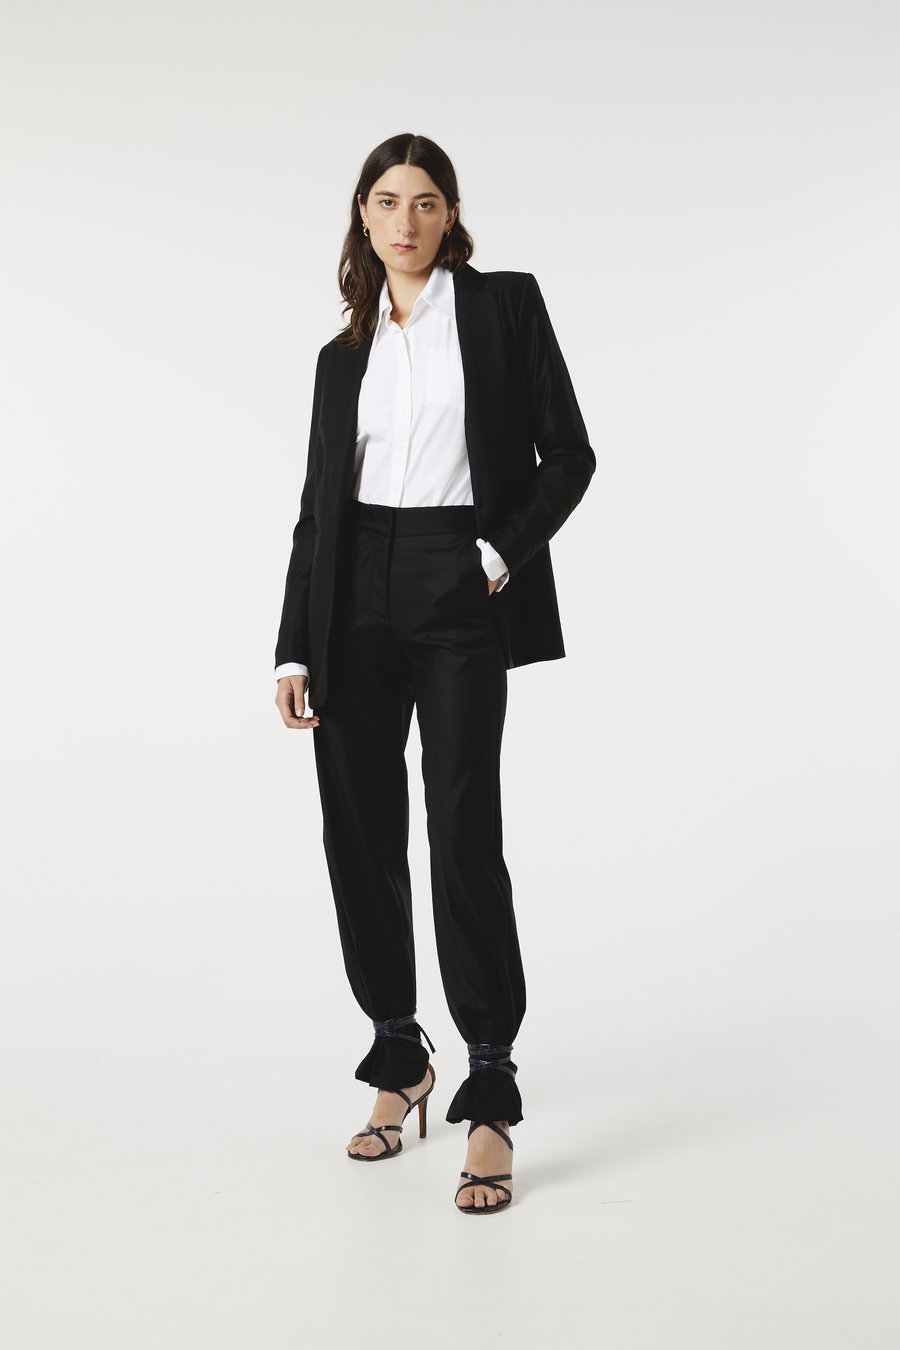 Model posing hand in pocket with ARNSDORF - SUIT TROUSER - BLACK